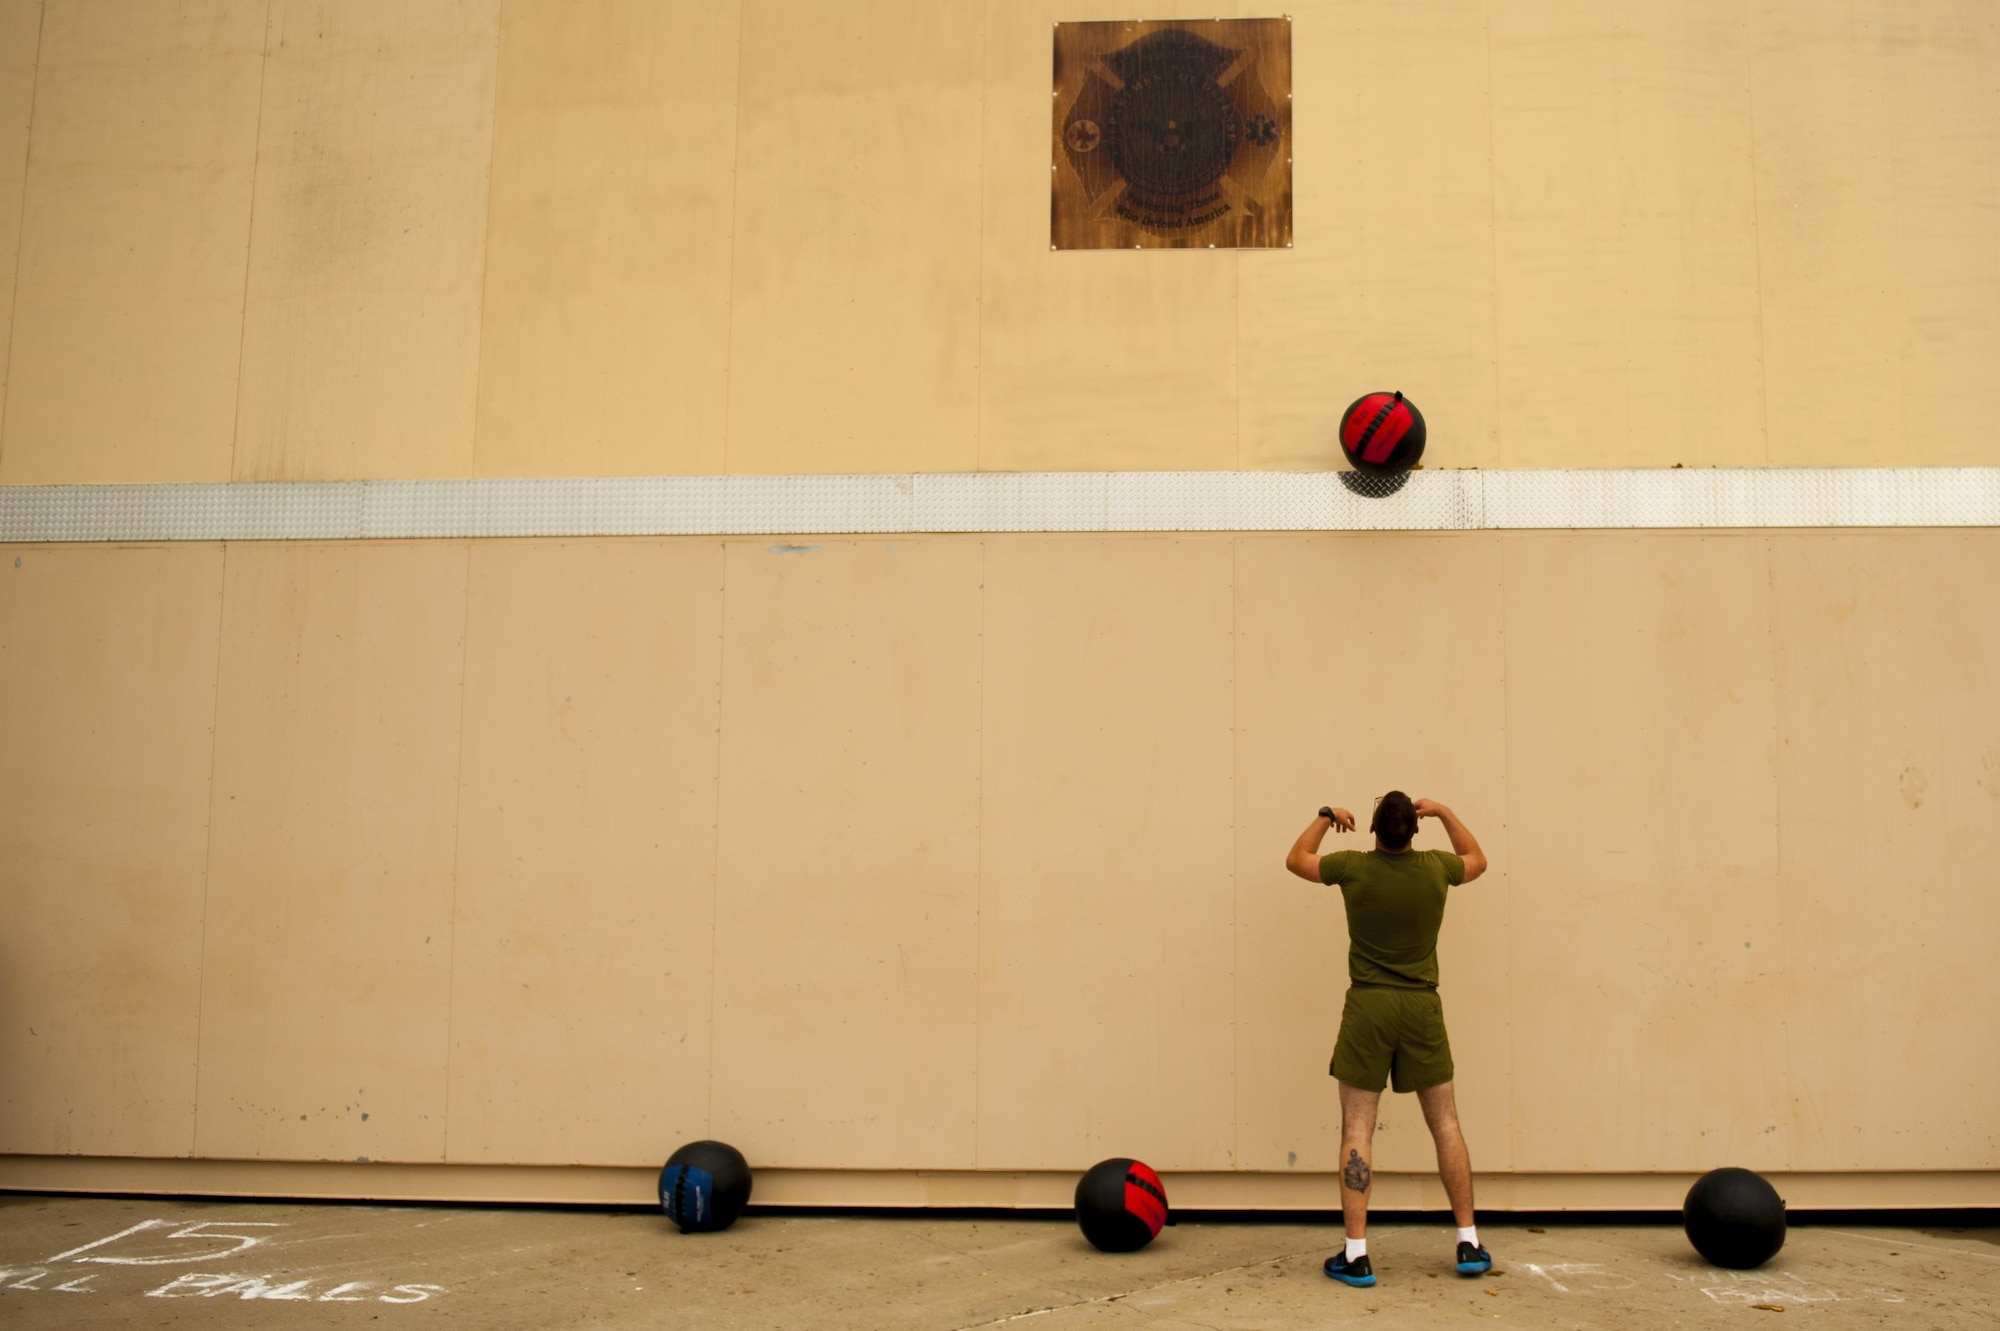 U.S. Marine Corps Pfc. Matthew Buenrostro, 312th Training Squadron trainee, performs a wall-ball exercise during the fourth annual Blood, Sweat and Stairs event at the Louis F. Garland Department of Defense Fire Academy on Goodfellow Air Force Base, Texas, Sept. 30, 2017. Blood, Sweat and Stairs is a circuit event comprised of numerous exercises spread out across the academy’s. (U.S. Air Force photo by Senior Airman Scott Jackson/Released)